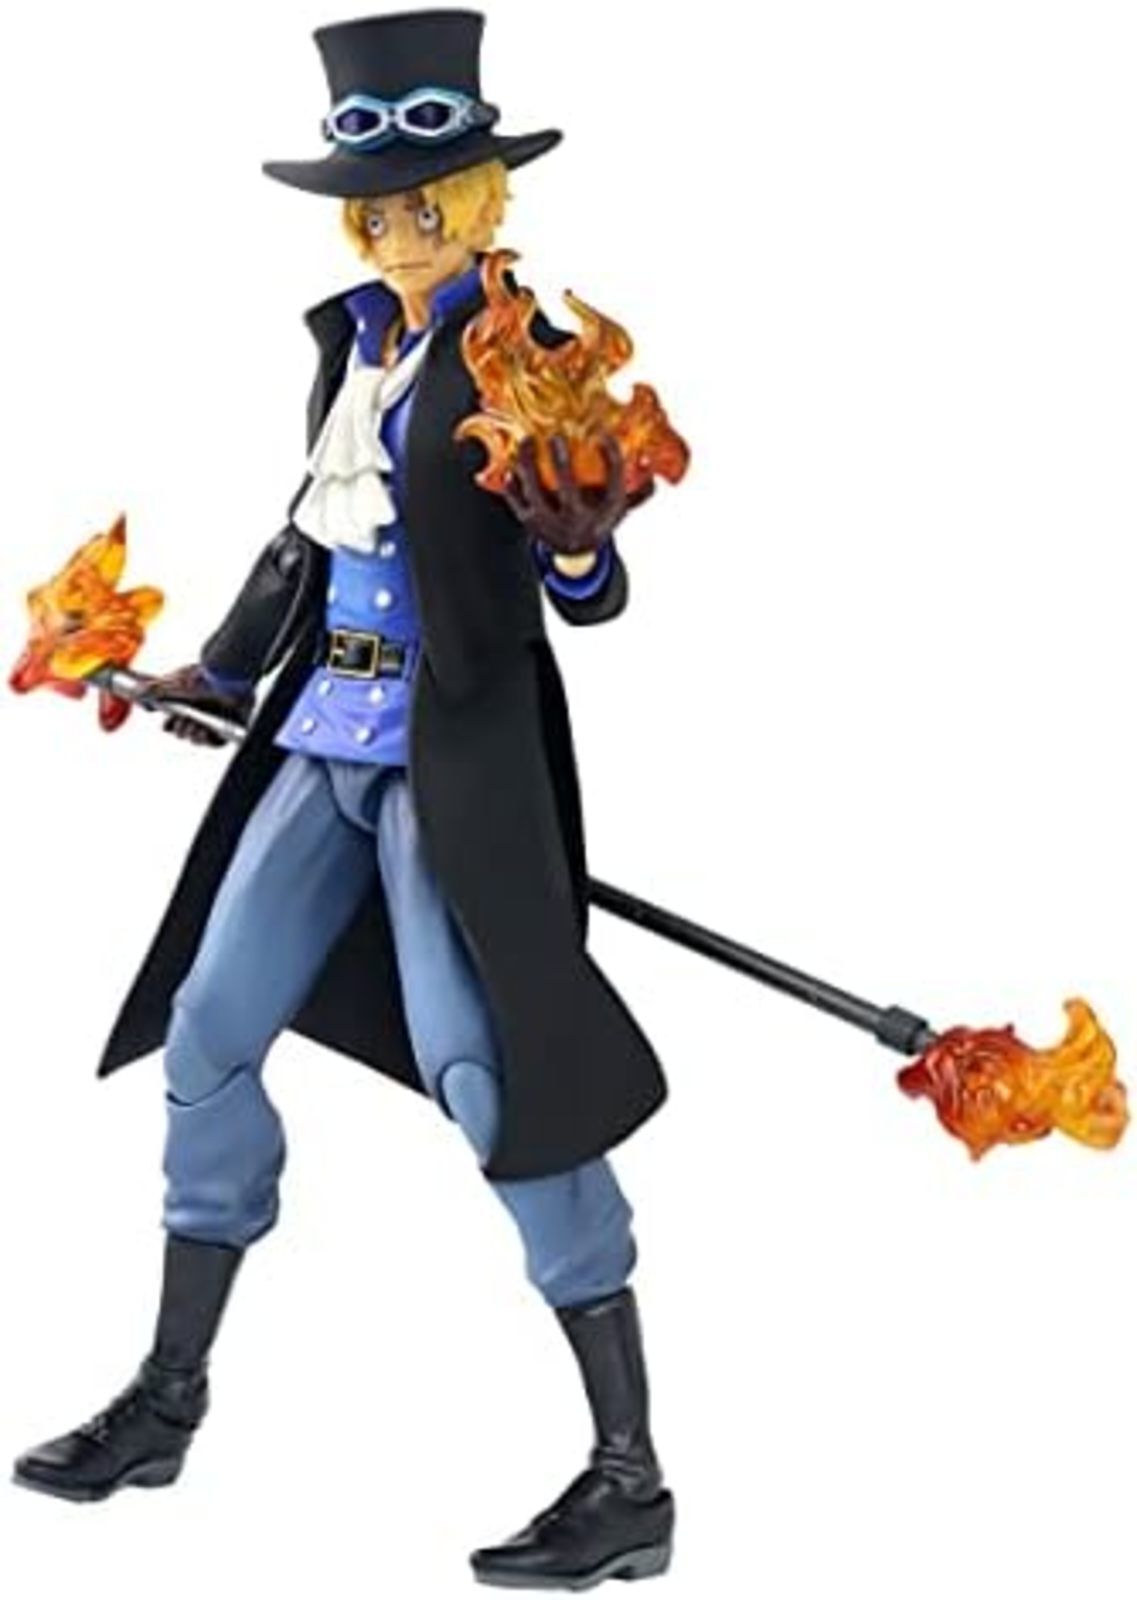 Astonishing MegaHouse VARIABLE ACTION HEROES ONE PIECE SABO 180mm PVC Action Figure F/S NEW on eBay